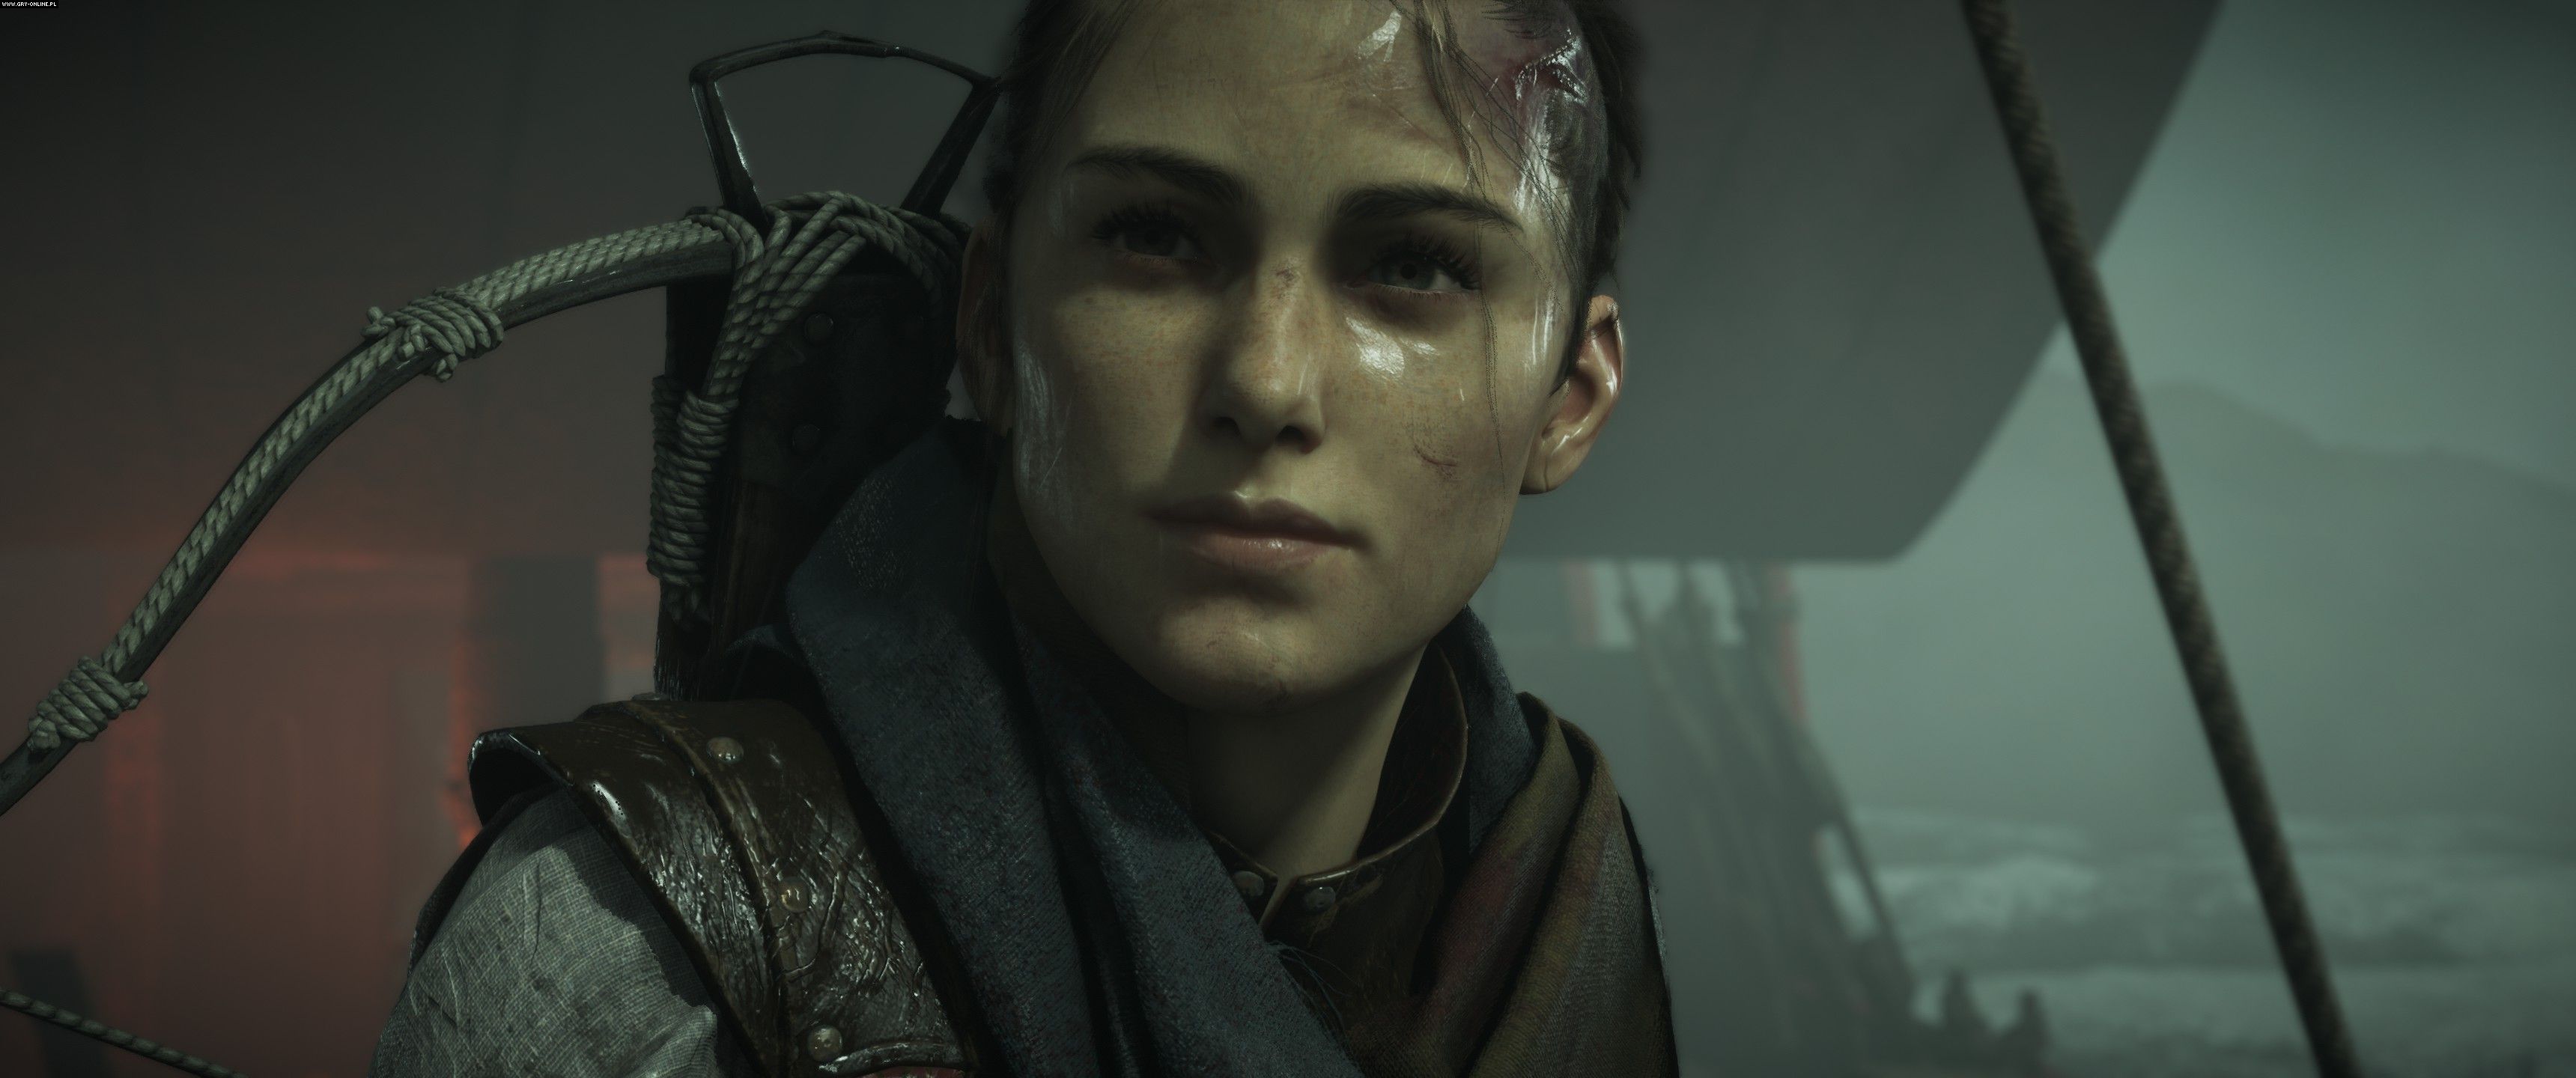 Plague Tale Requiem is the Reason Why I Still Play Games - Review